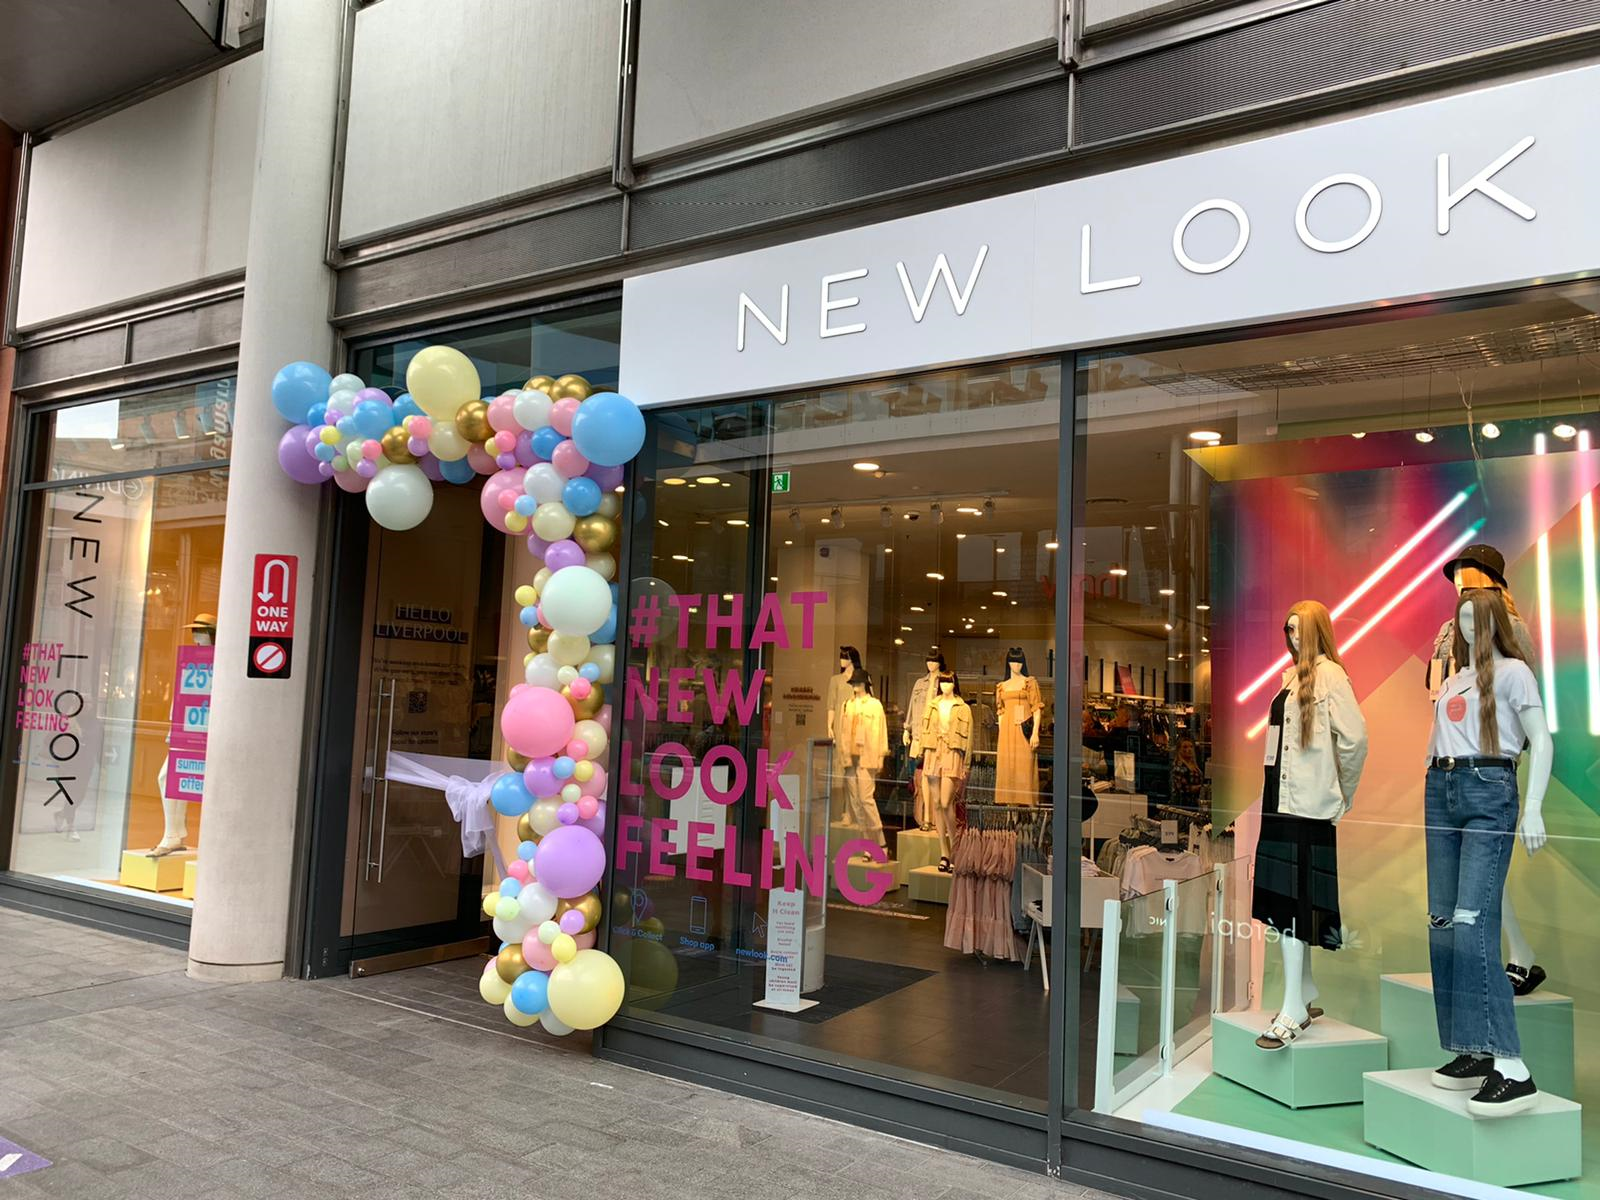 Images New Look - Closed